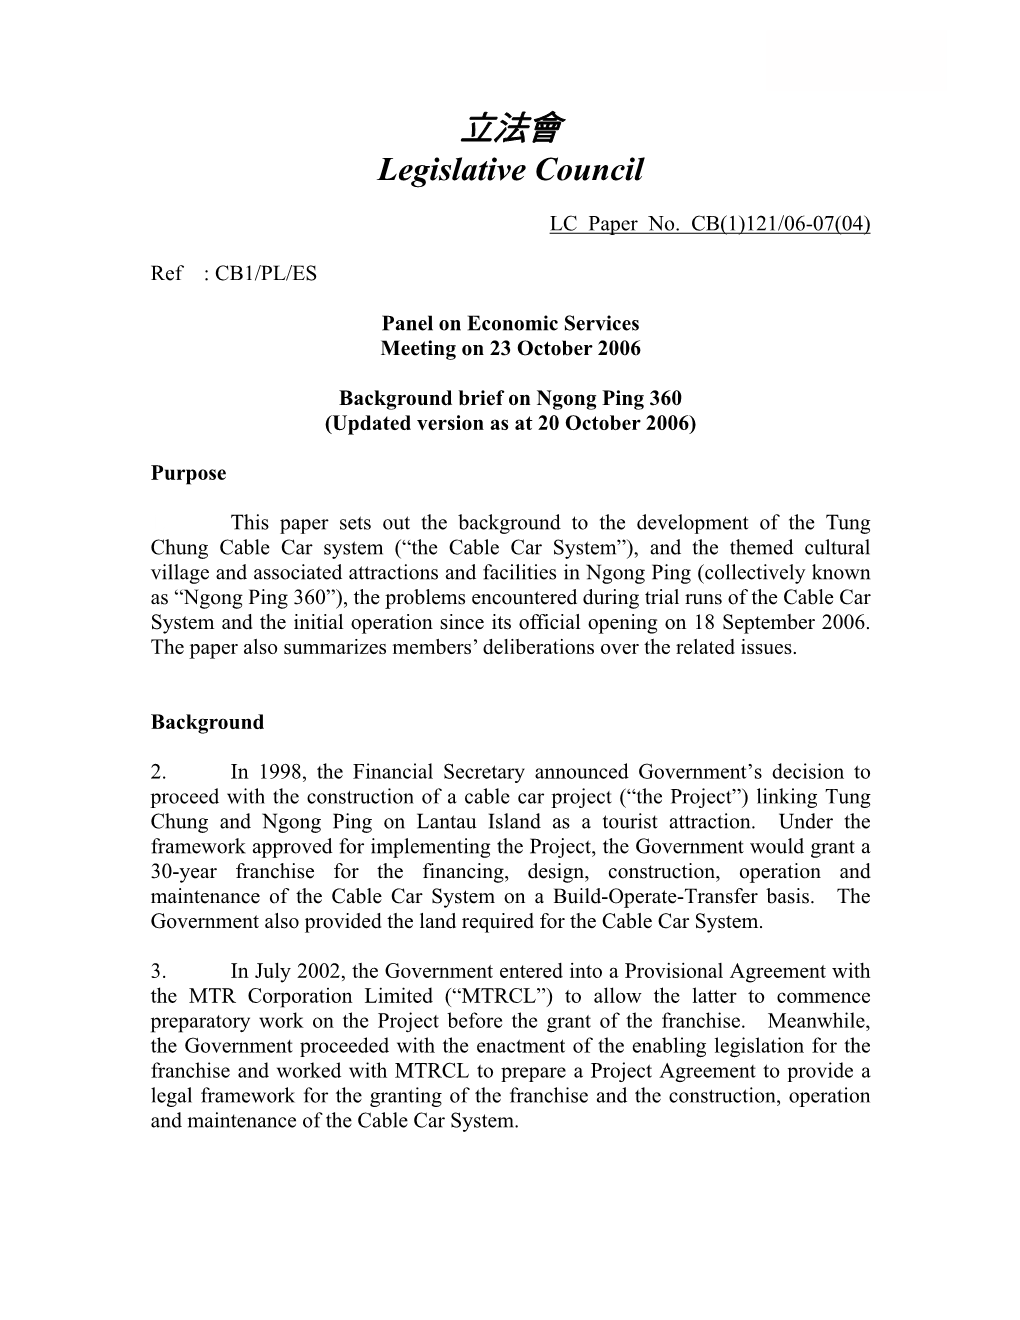 Background Brief on Ngong Ping 360 (Updated Version As at 20 October 2006)